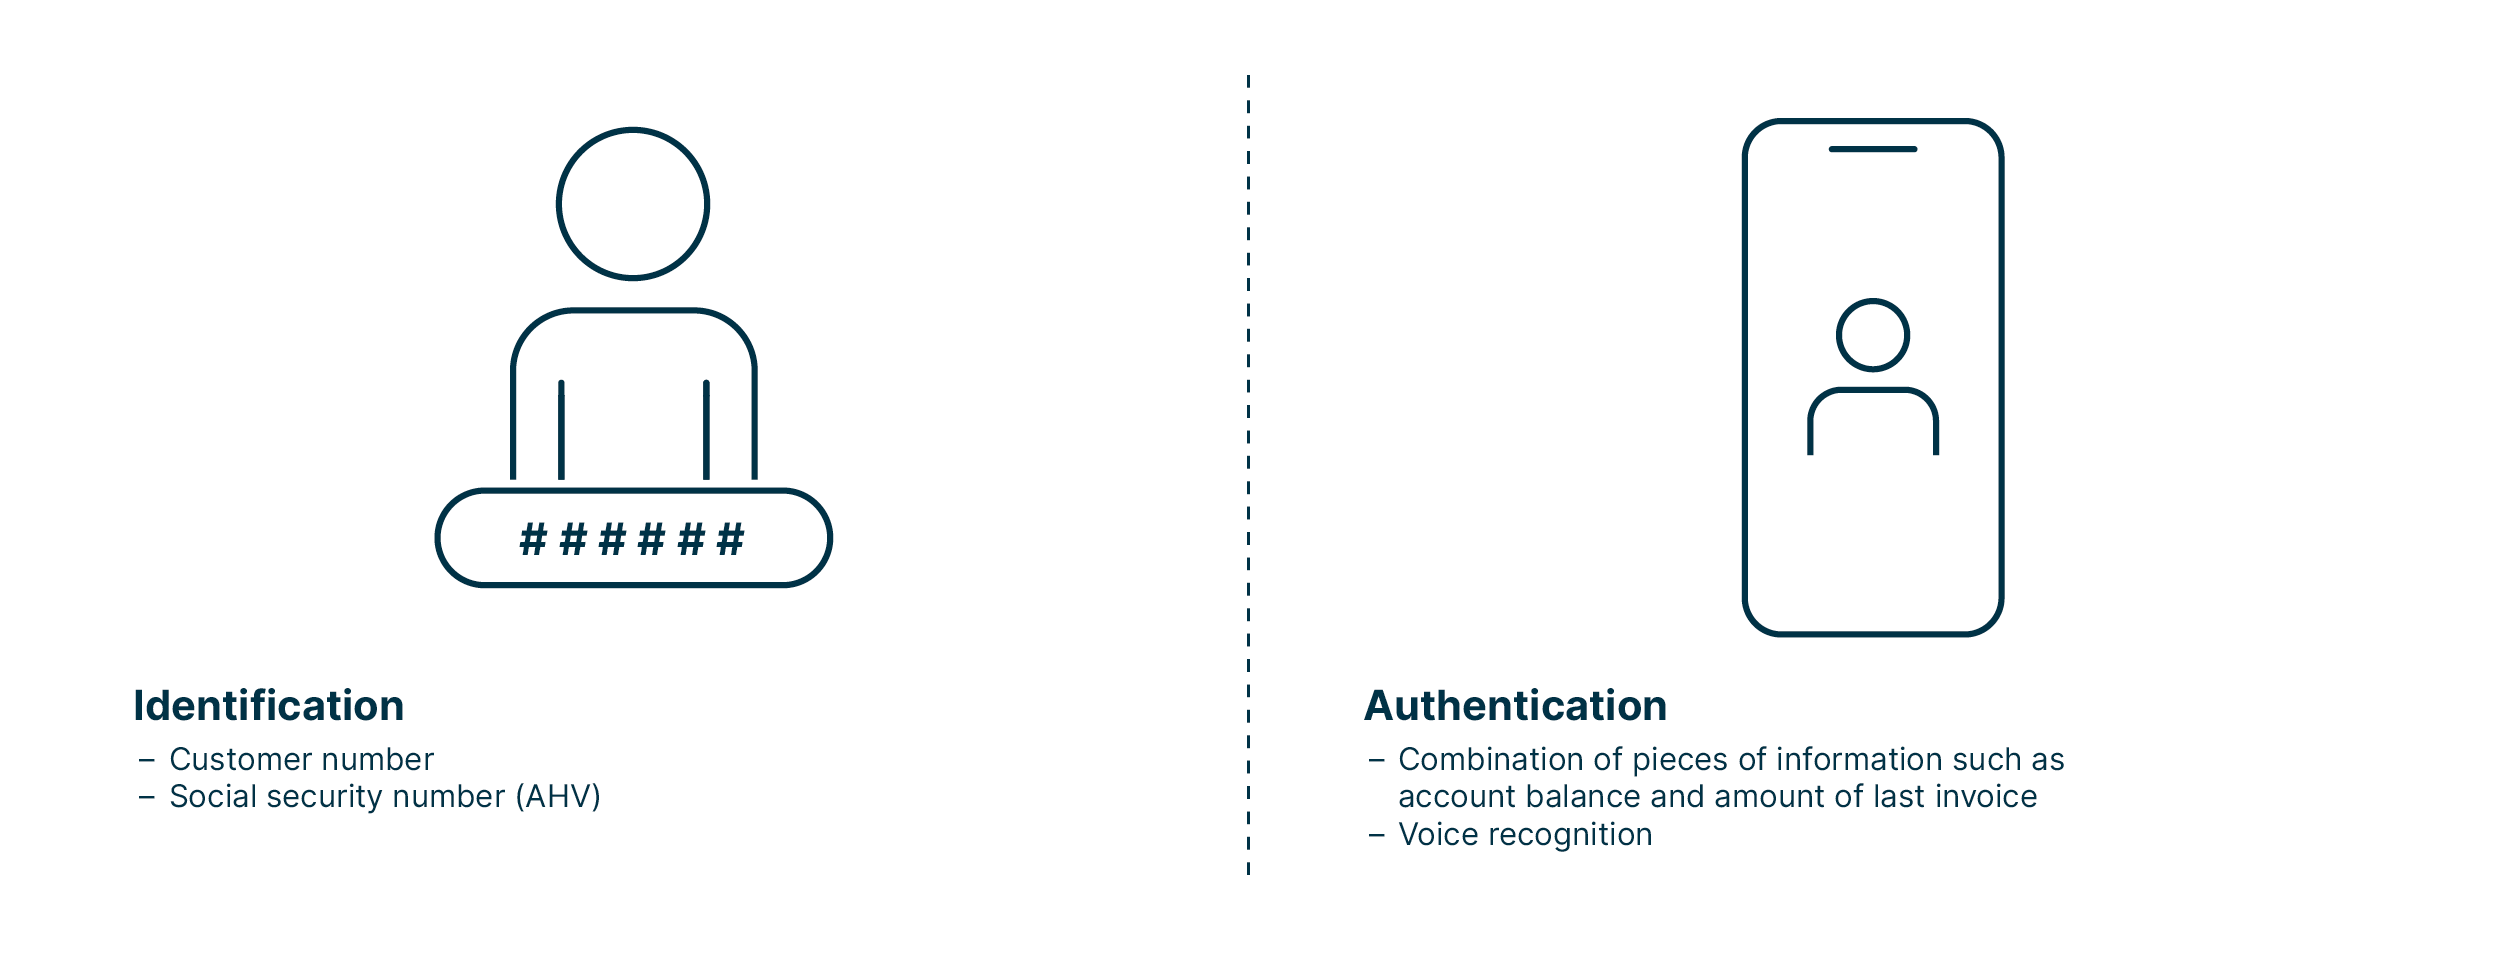 infographic_showing_elements_for_identification_and_for_authentication